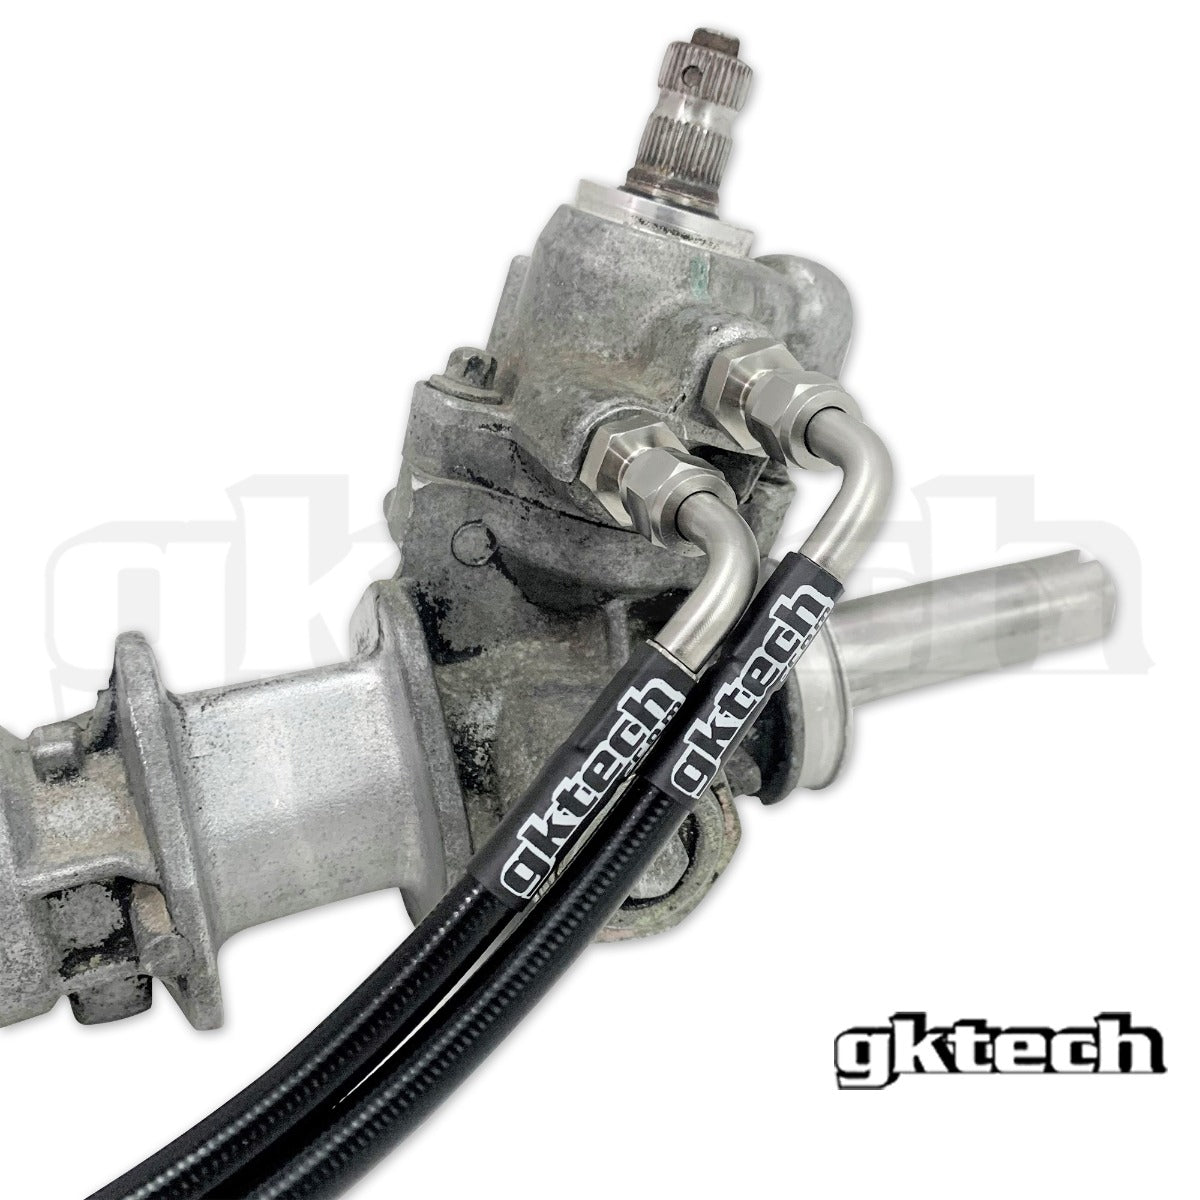 S13/S14 POWER STEERING HARD LINE REPLACEMENTS (PAIR)